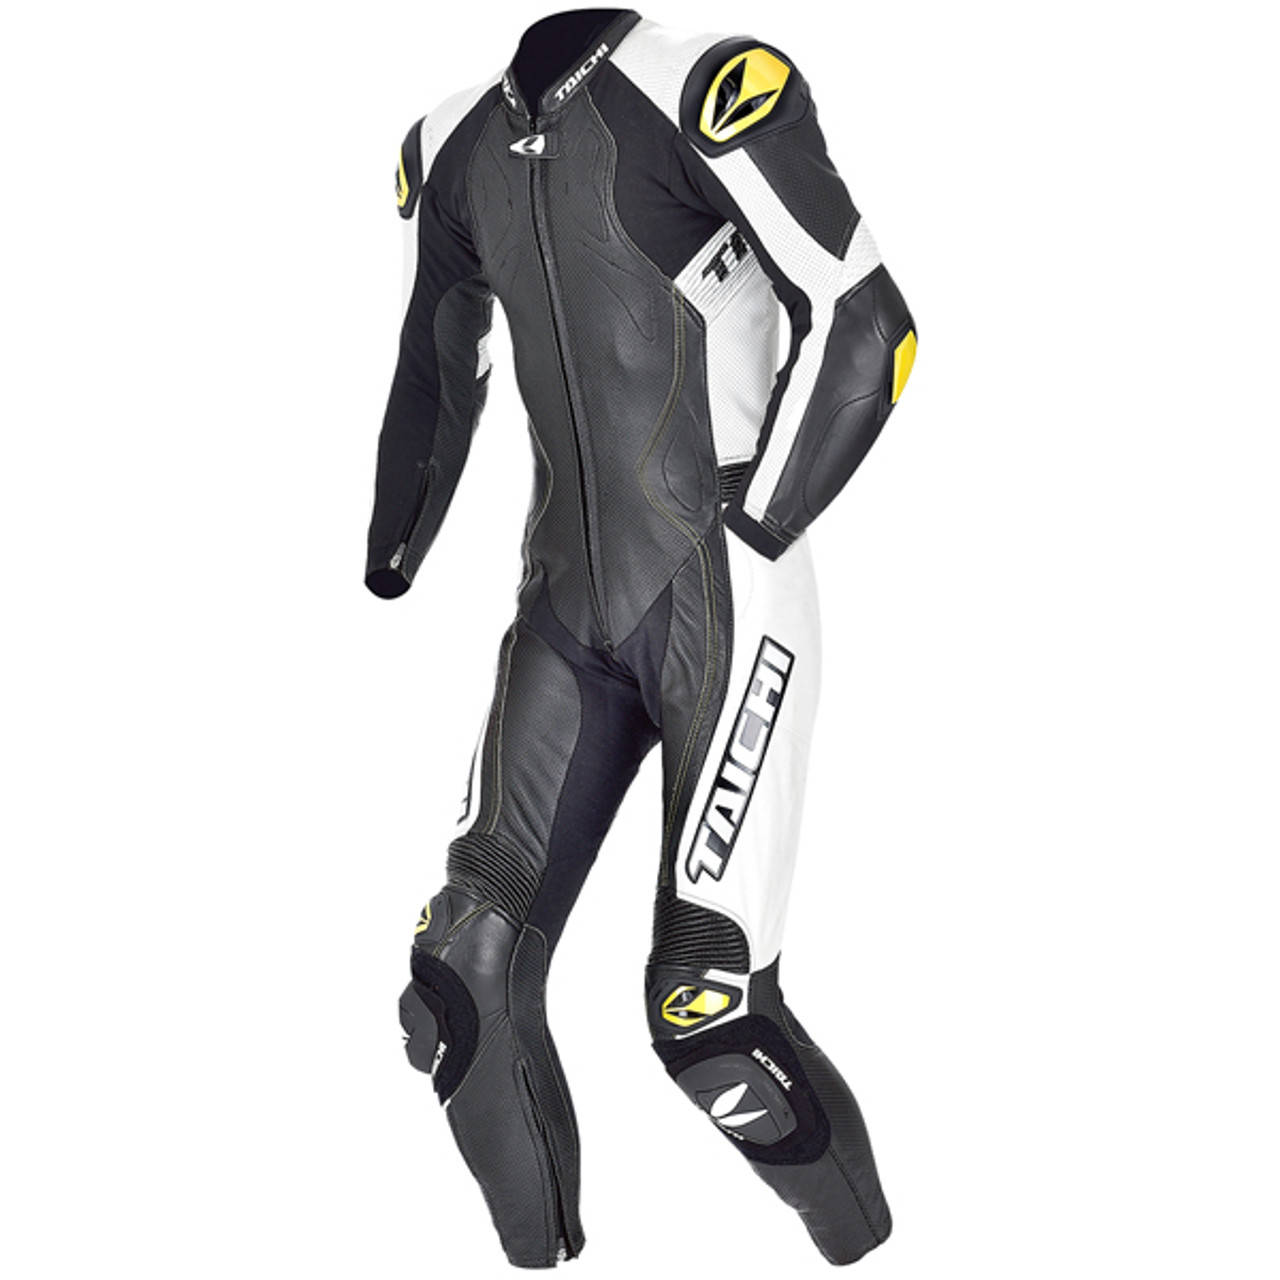 Rst Race Suit Size Chart | lupon.gov.ph